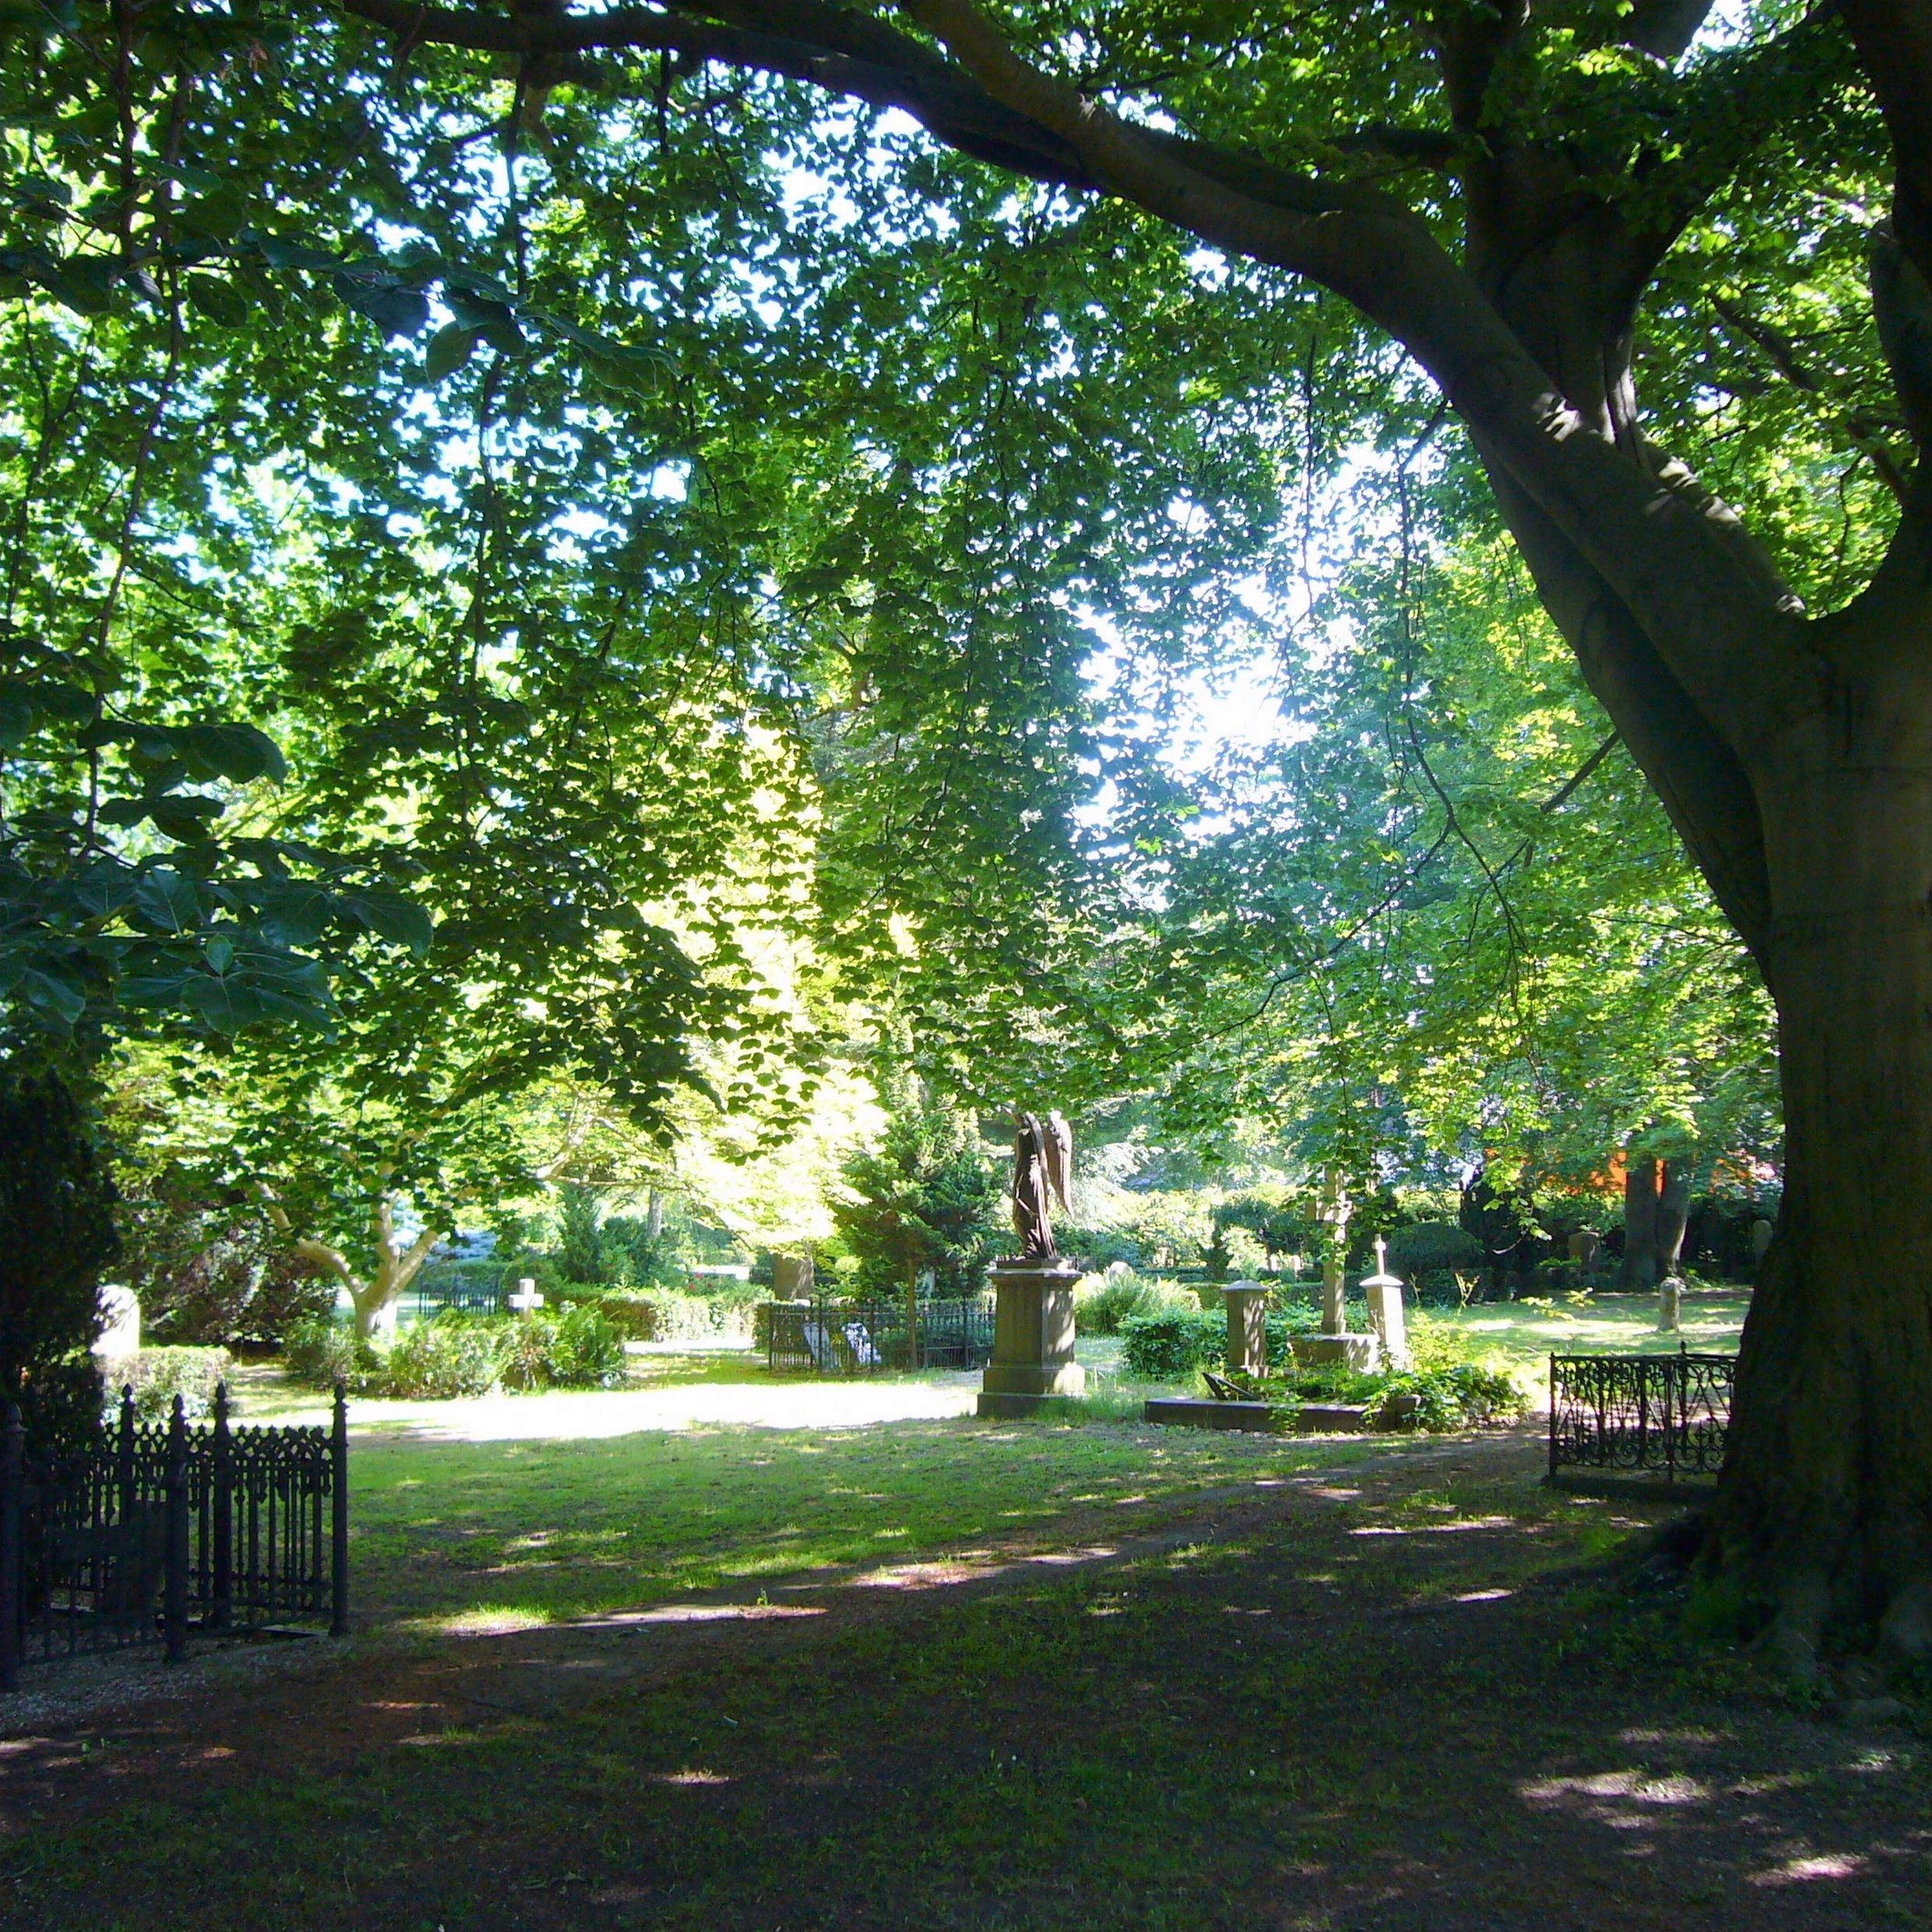 Local Round-Up: Change of cemeteries to make room for more park area in Frederiksberg